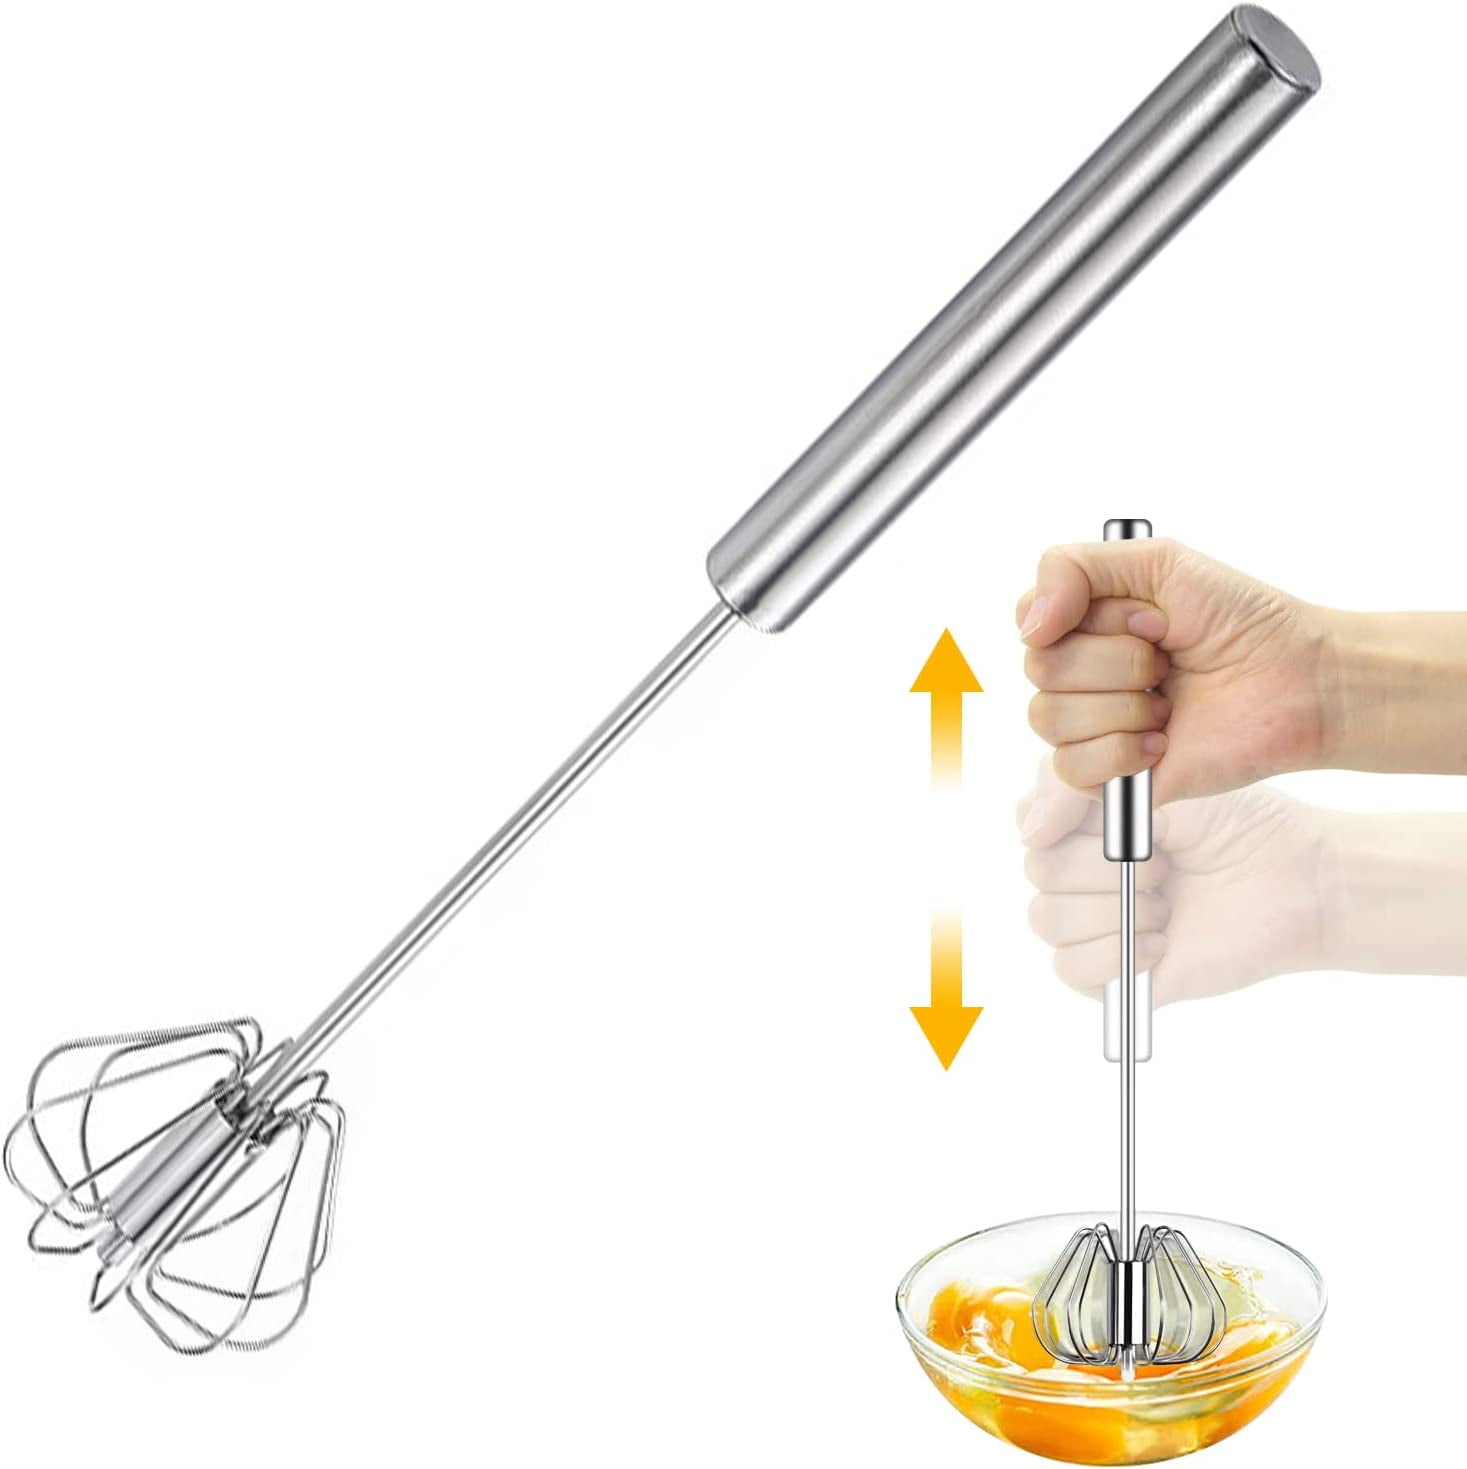 Anyi Whisk 12inch Stainless Steel Long Handle Egg Beater Hand Push Wisking Tool for Home Whisks for Cooking, Blending, Beating & Stirring (Silver)